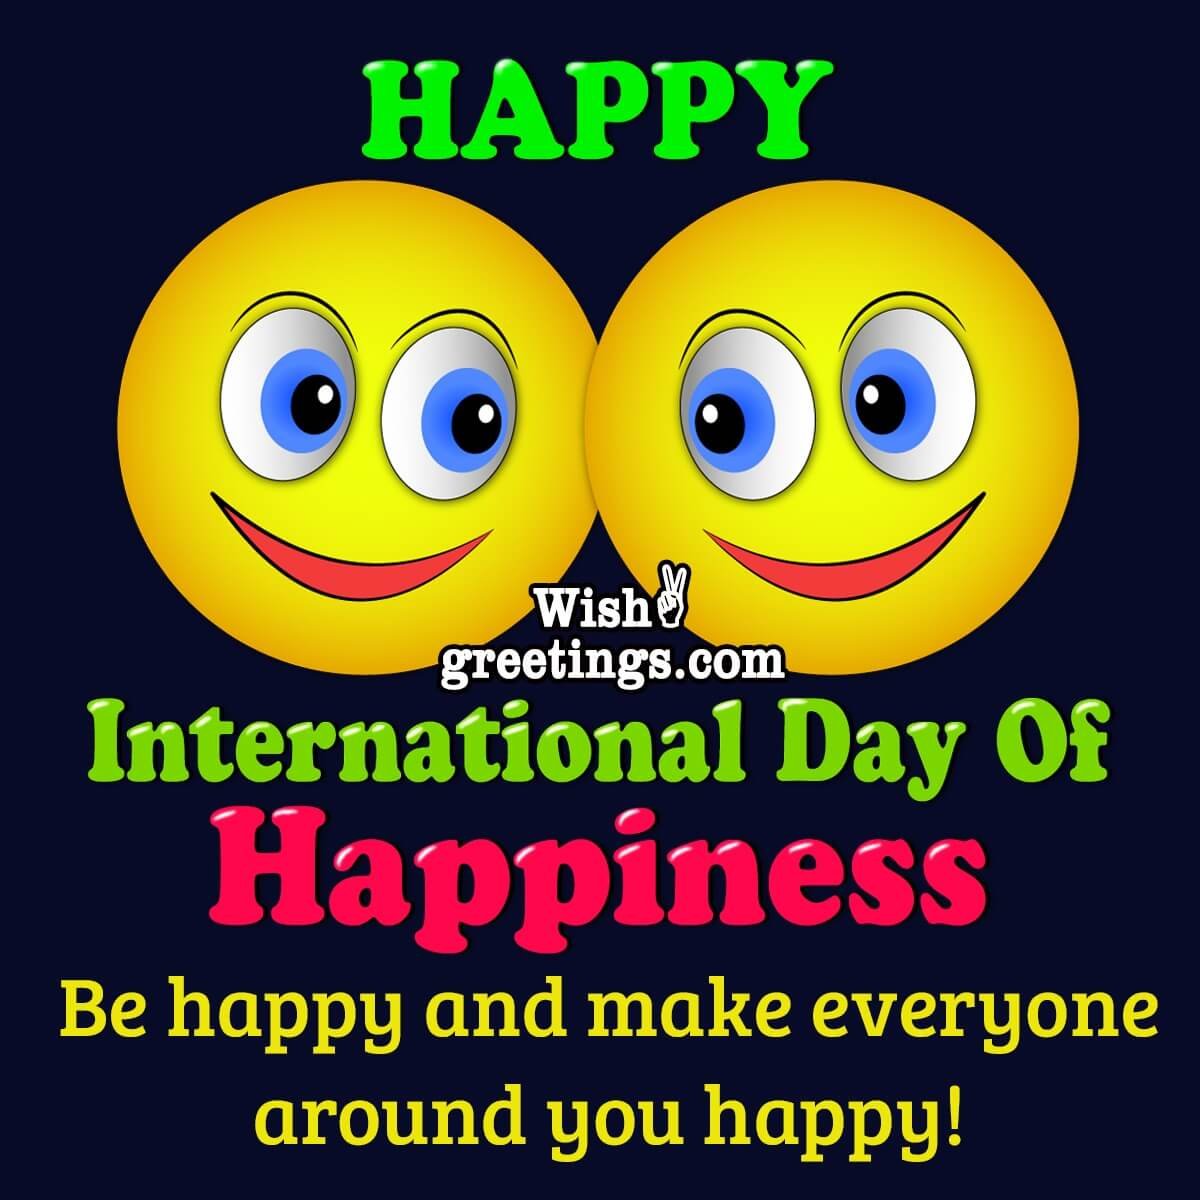 Happy International Day Of Happiness Message